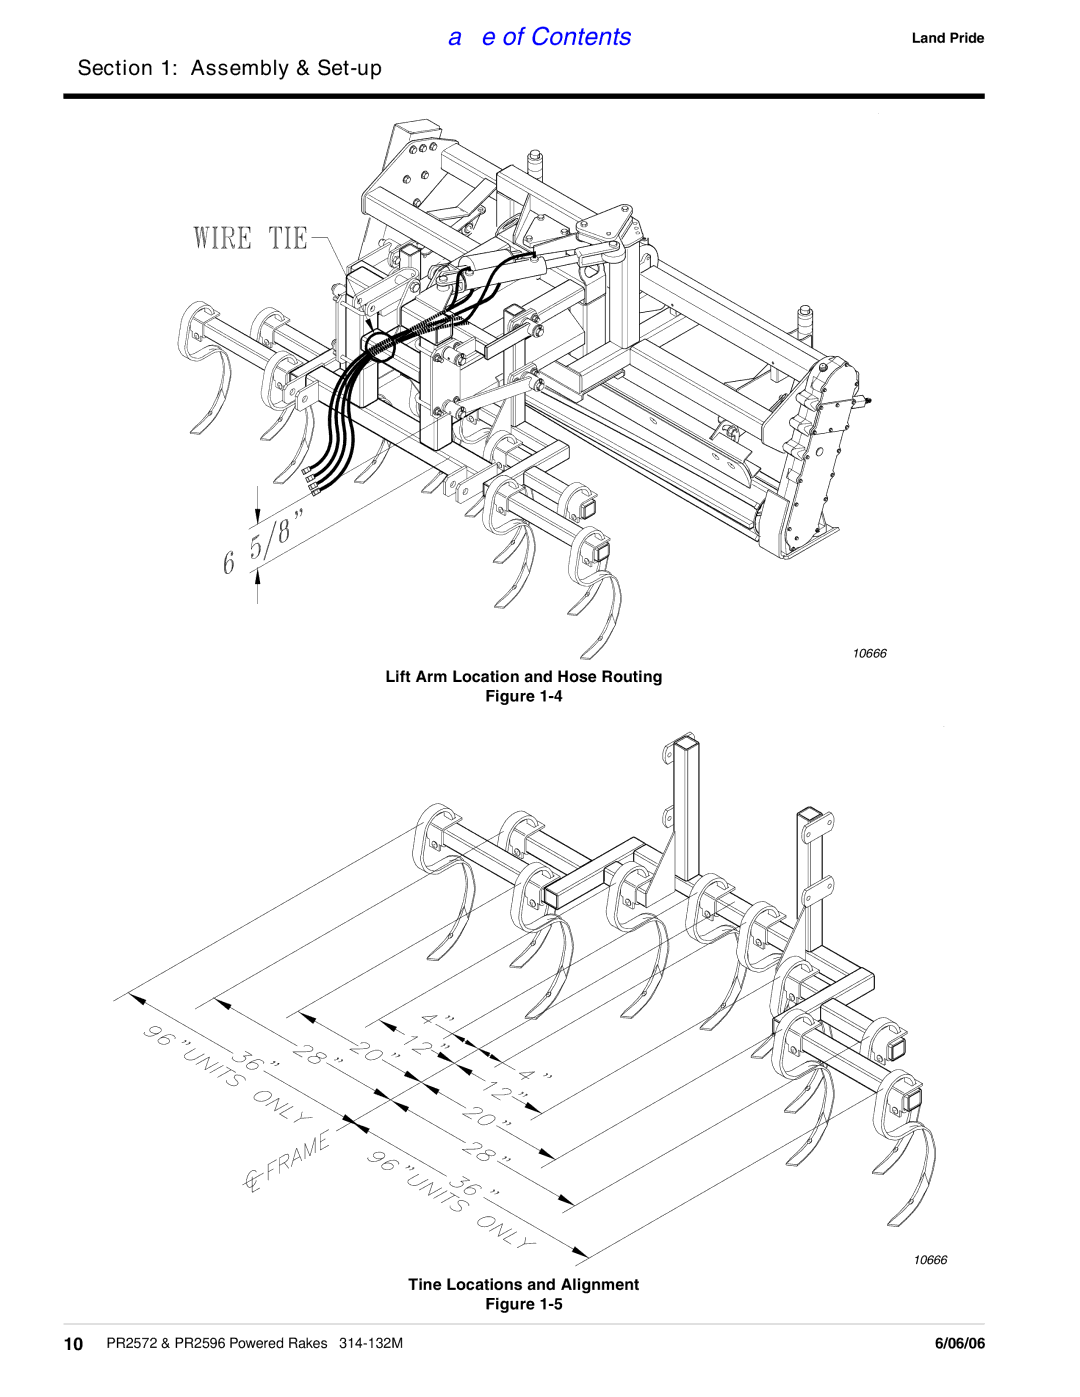 Land Pride PR2596, PR2572 manual Lift Arm Location and Hose Routing 